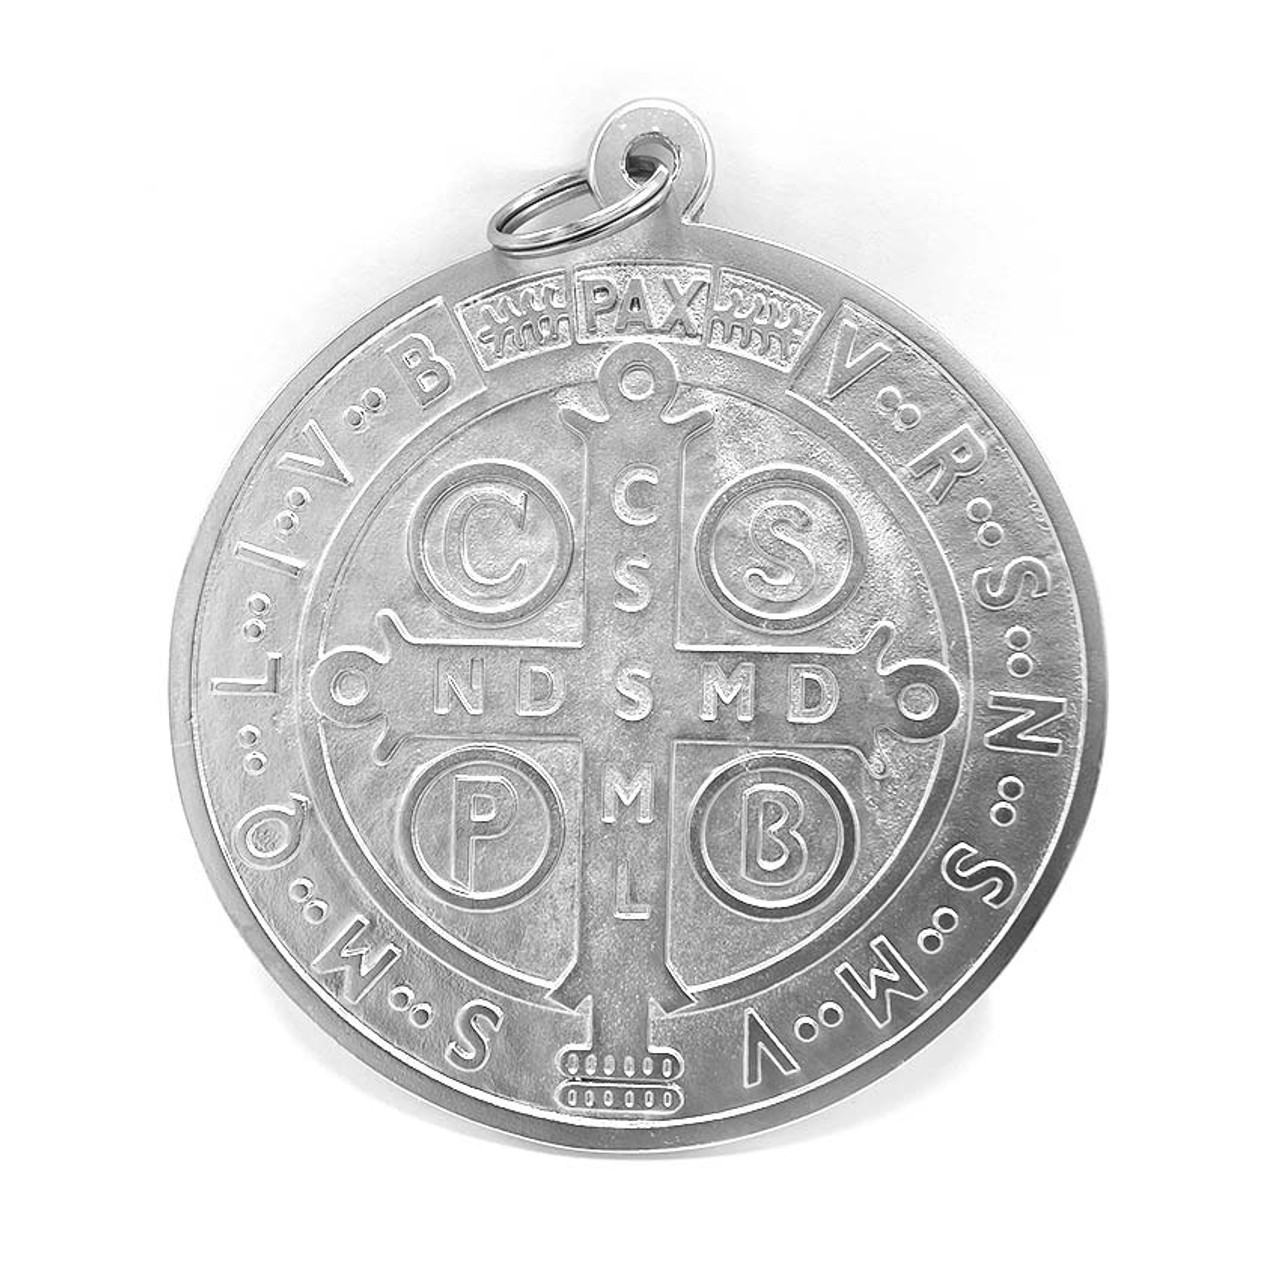 4 St. Benedict Medal Silver Tone